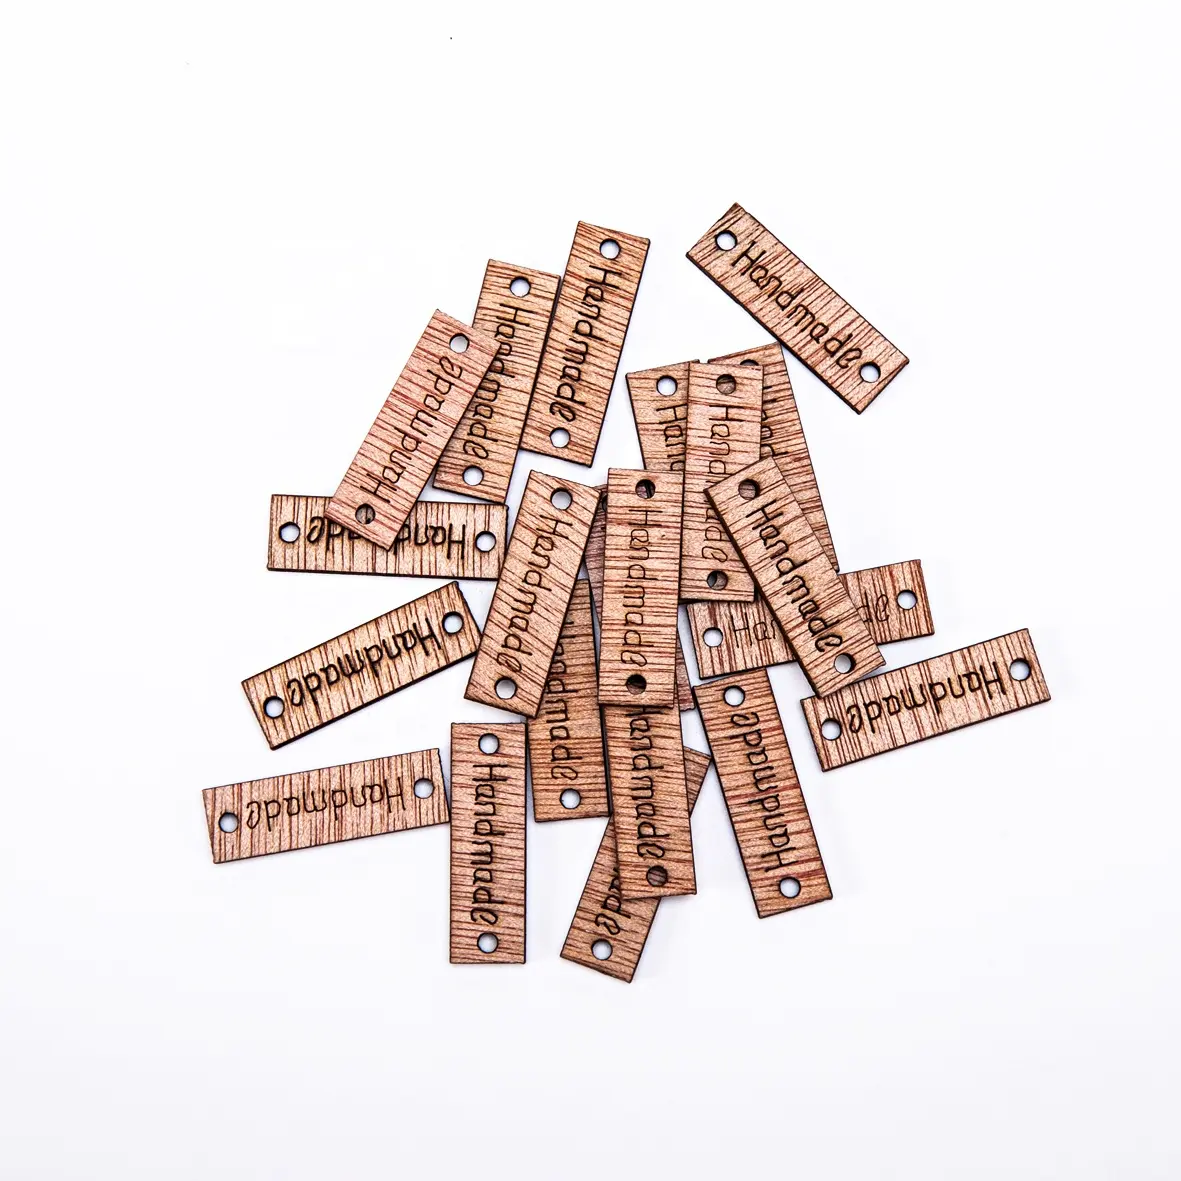 100pcs/bag 28x9mm Rustic Handmade Cutouts Wood Square Connectors Embellishments Crafts Toppers Chips Cardmaking Scrapbooking